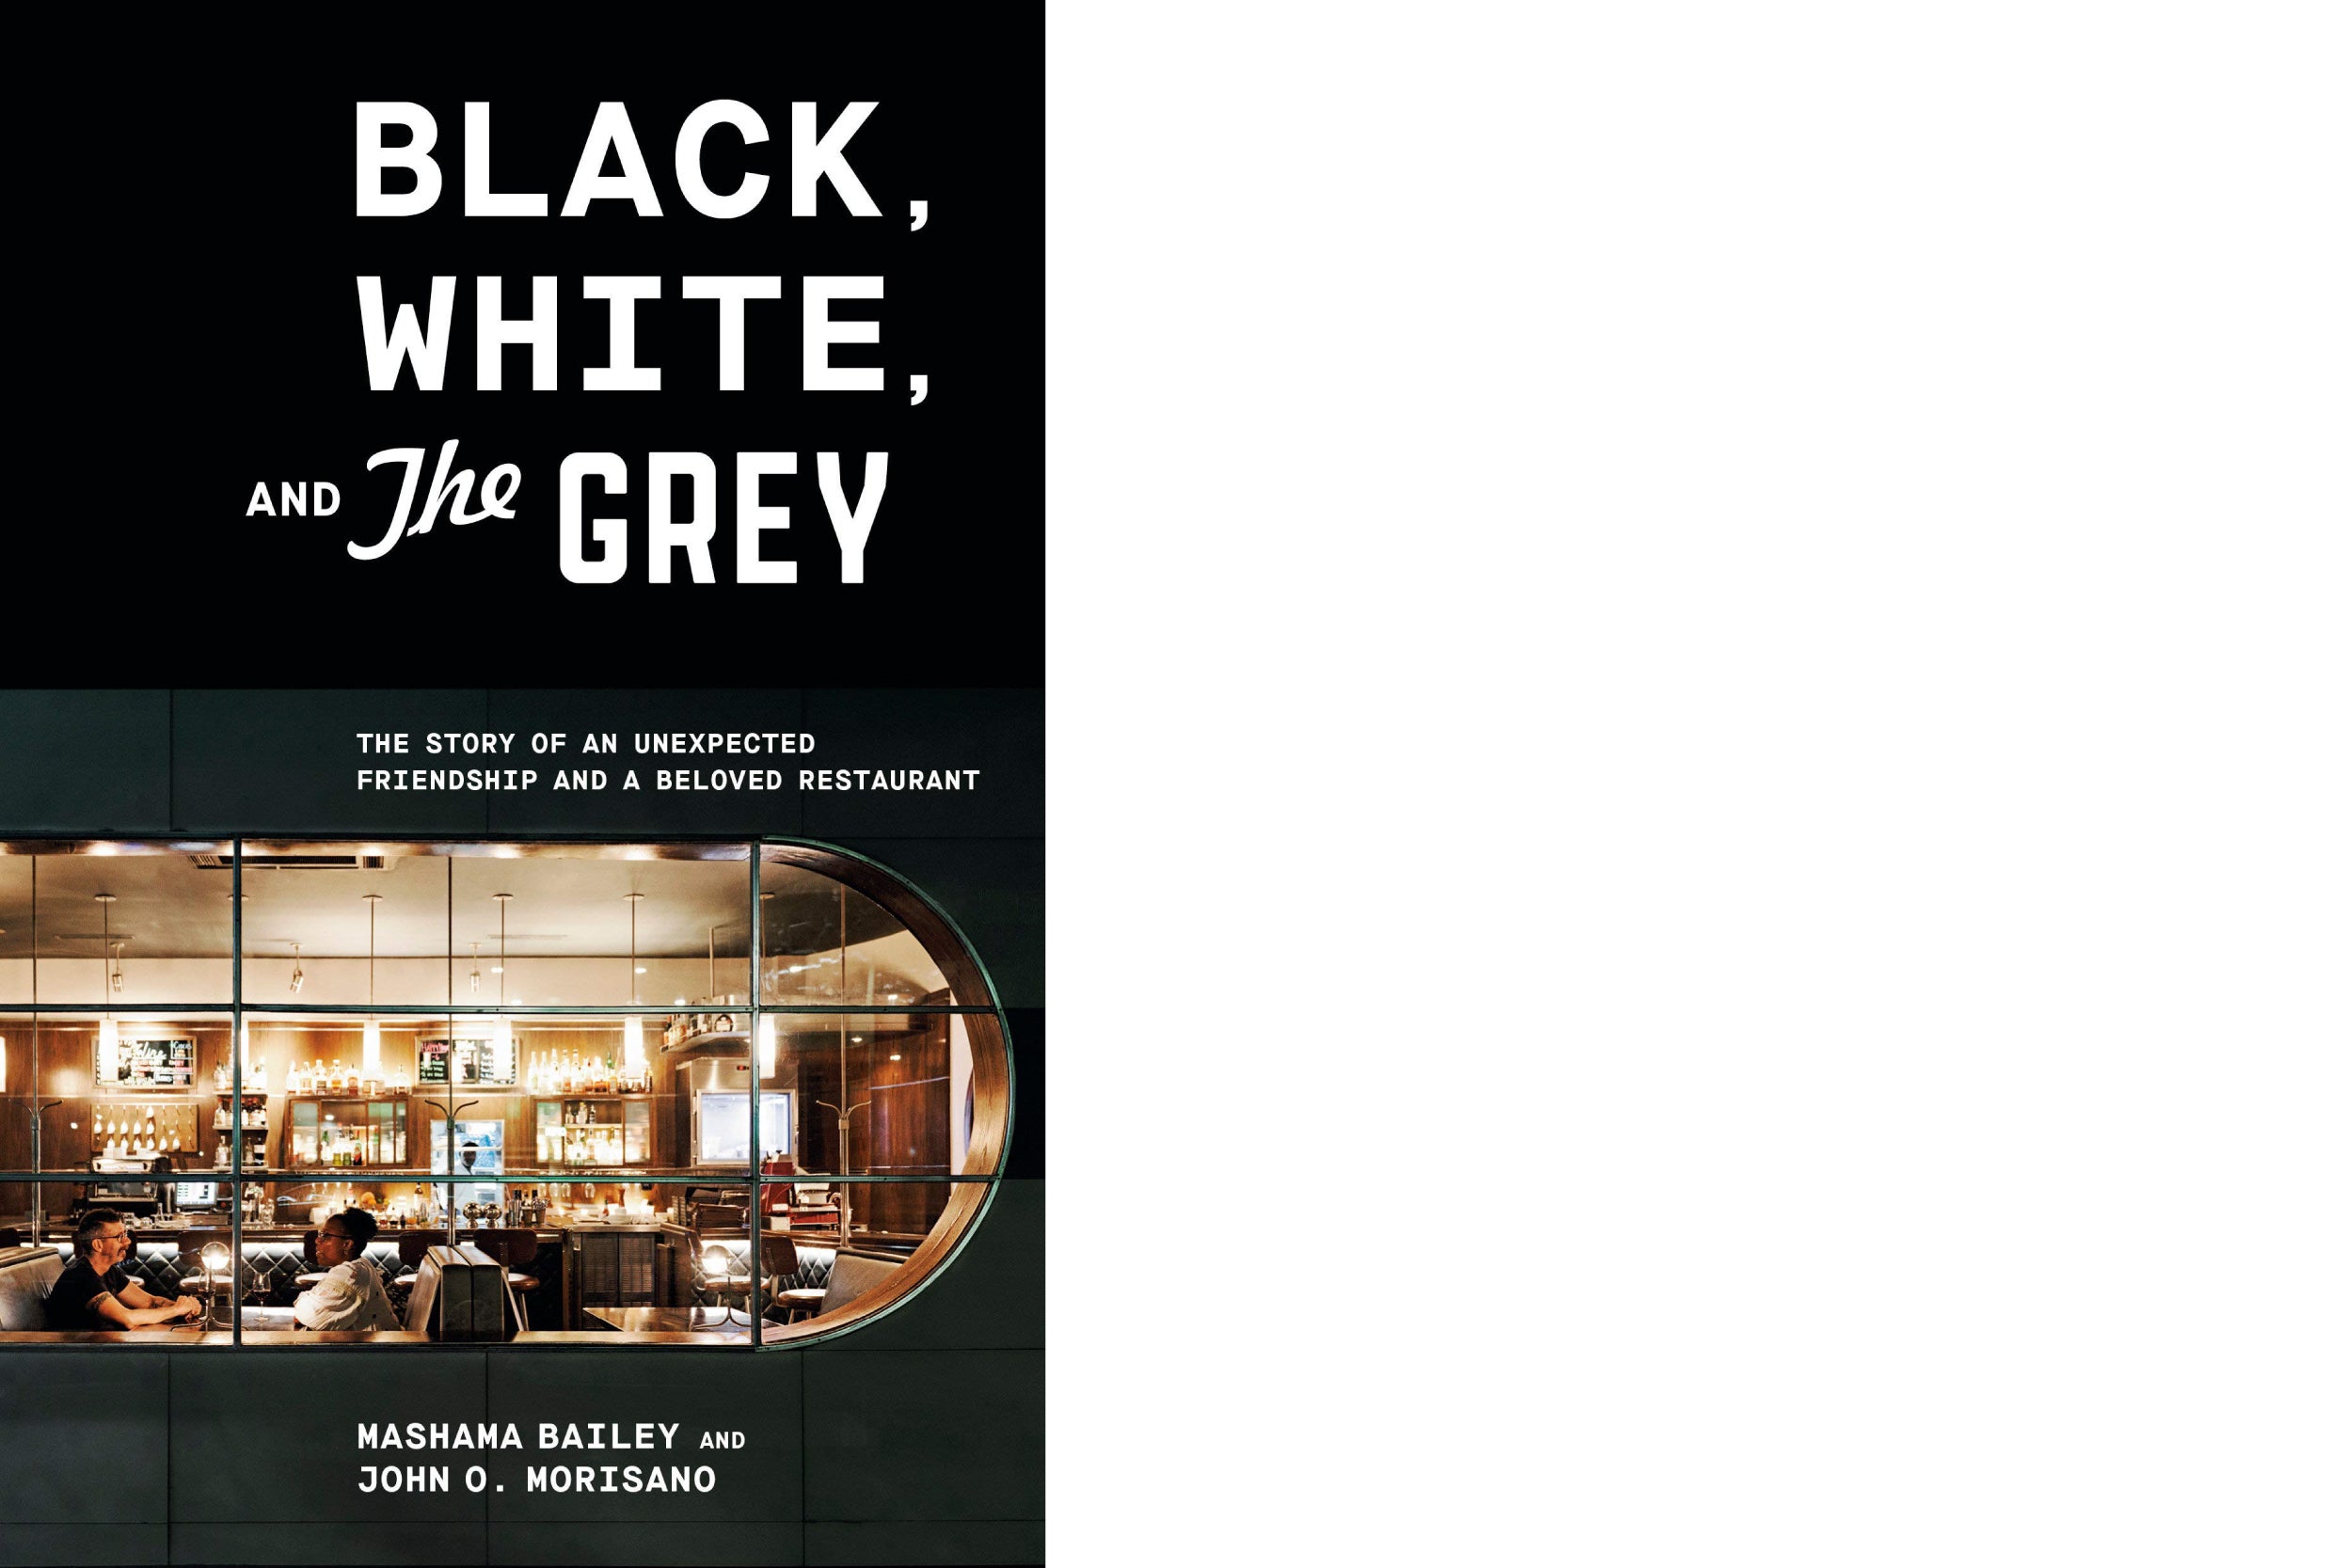 Book cover: “Black, White, and The Grey: The Story of an Unexpected Friendship and a Beloved Restaurant” by Mashama Bailey and John O. Morisano.